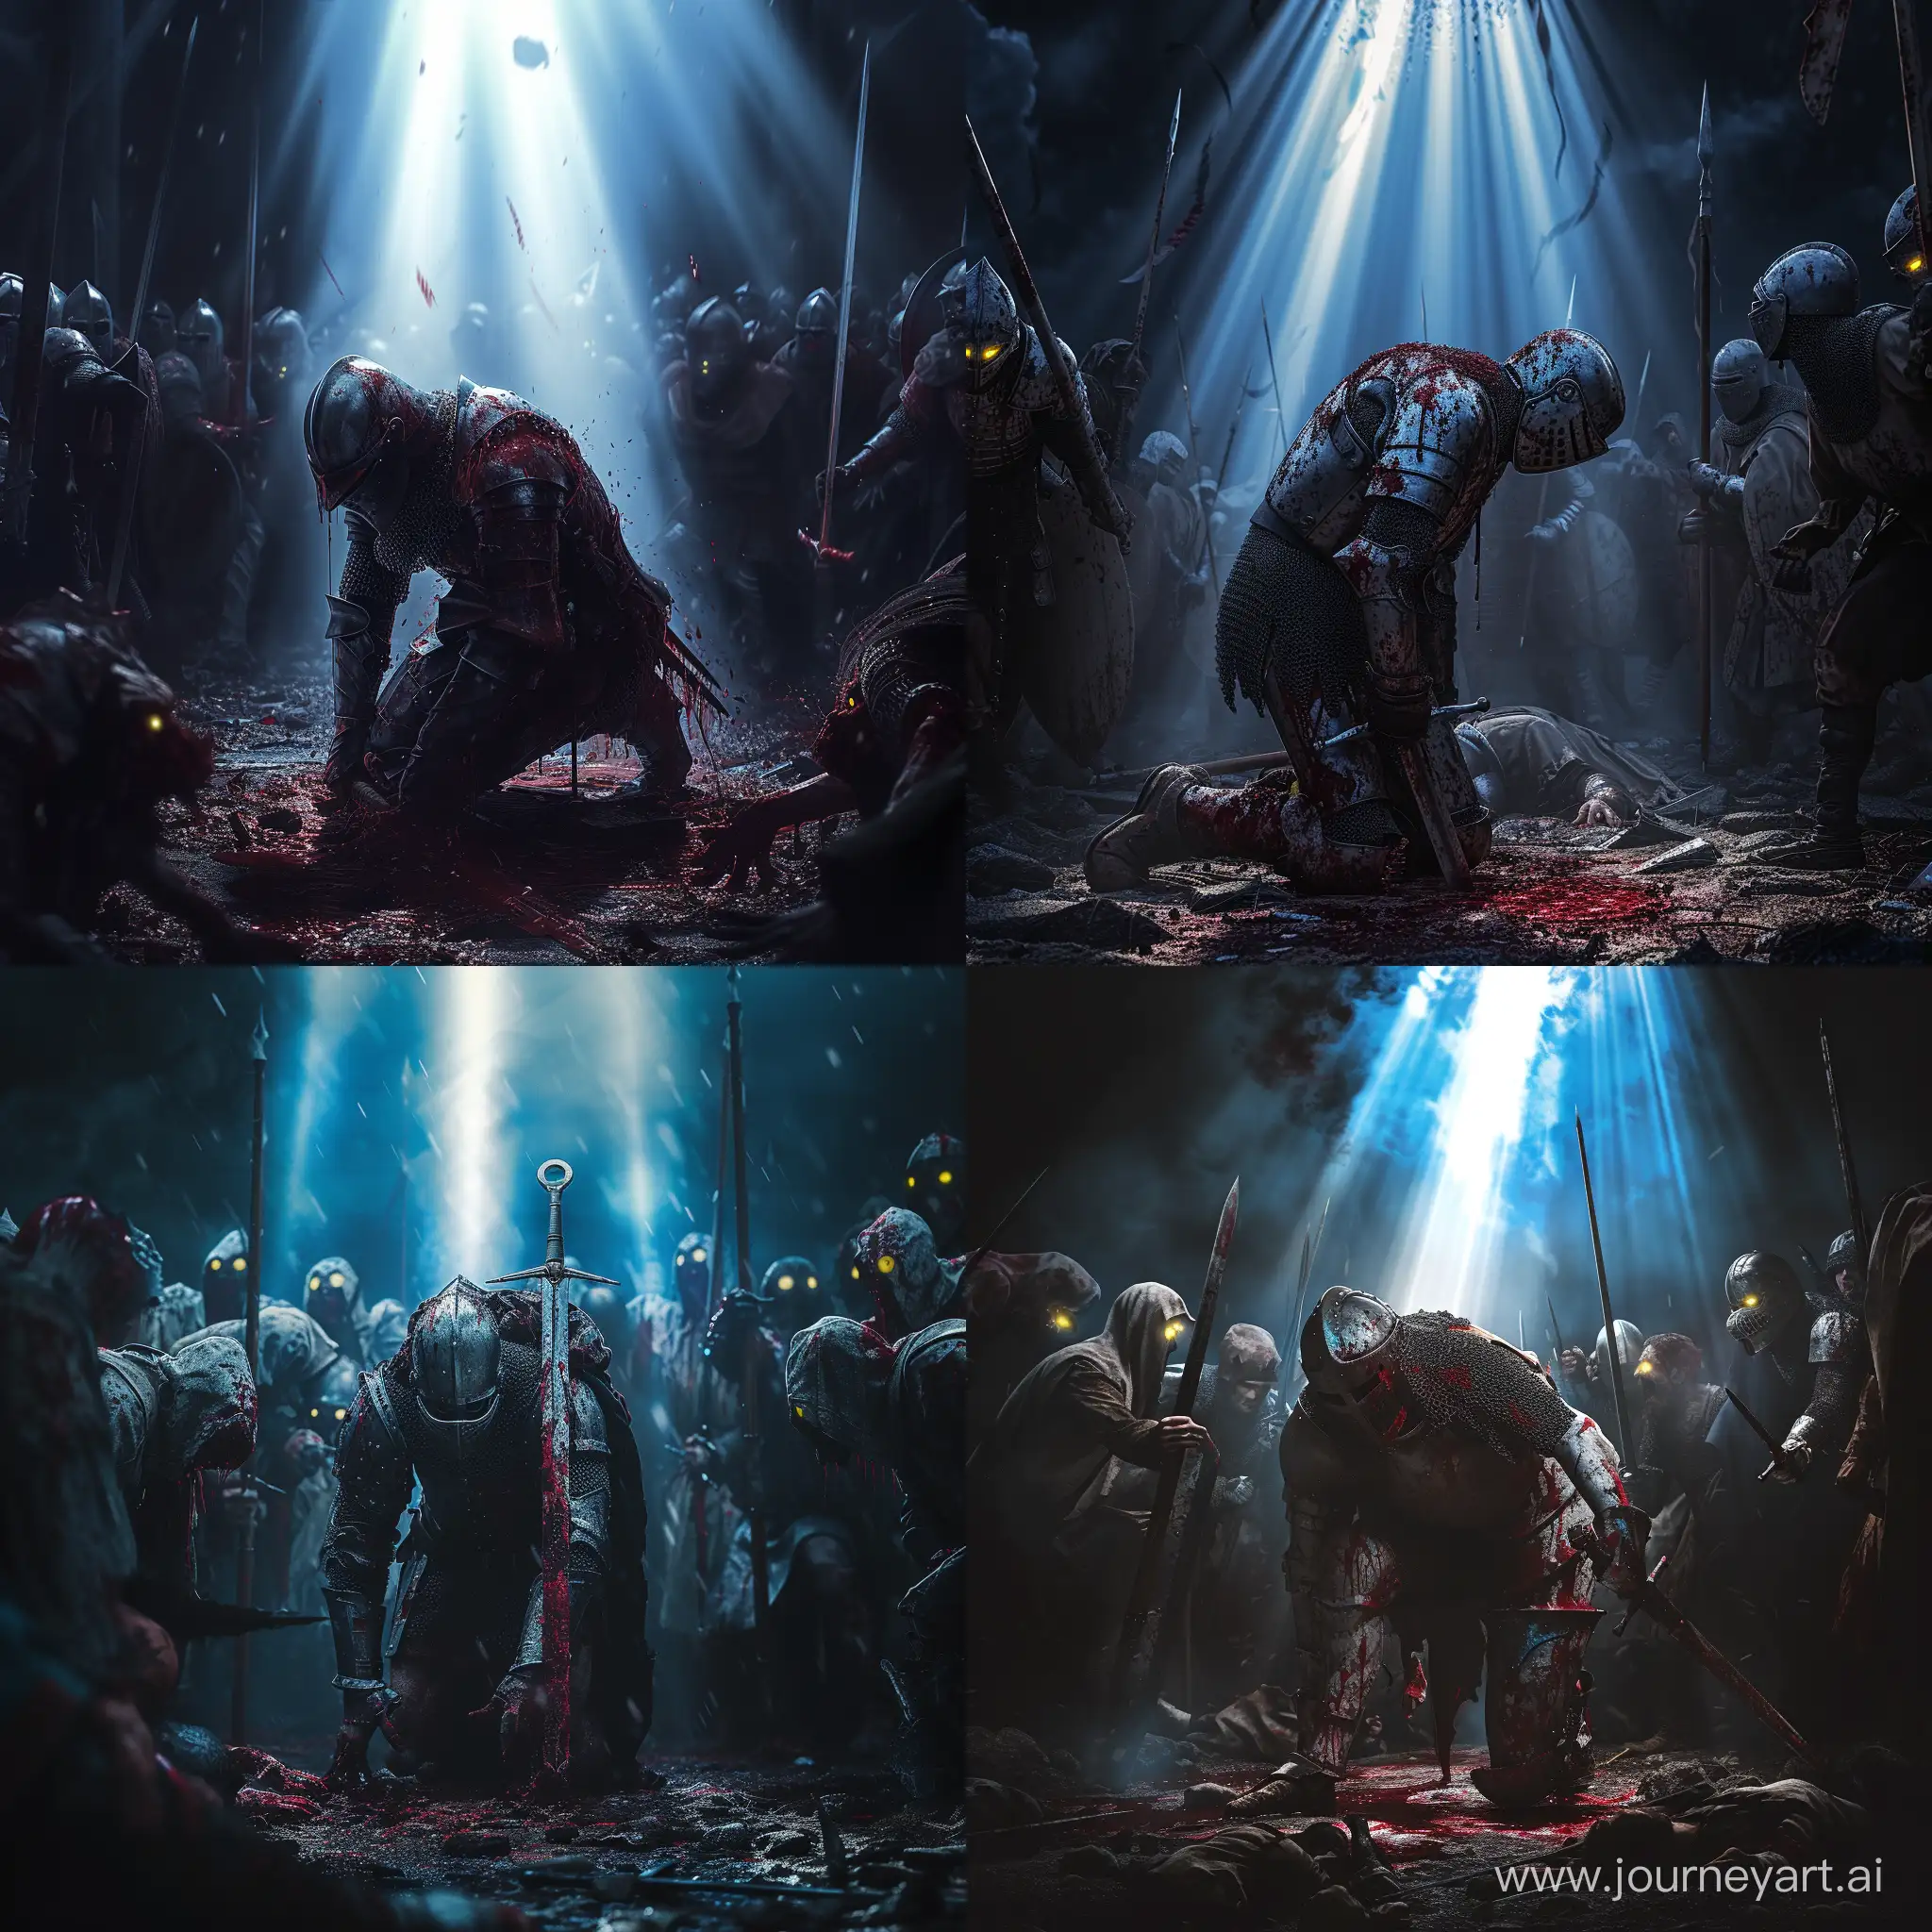 A dark battle scene, in the center, a knight without a helmet, wearing blood-stained armor.
One knee on the ground, head bowed and stands on his right sword planted in the ground, facing the photographer.
he is surrounded by enemies dressed in old dark clothes, we can clearly see their big yellow eyes soaked in red. they are going to attack the knight.
a few rays of blue, white and red color illuminate the knight
dramatic scene cinematic style gothic atmosphere
ultra detailed hdr